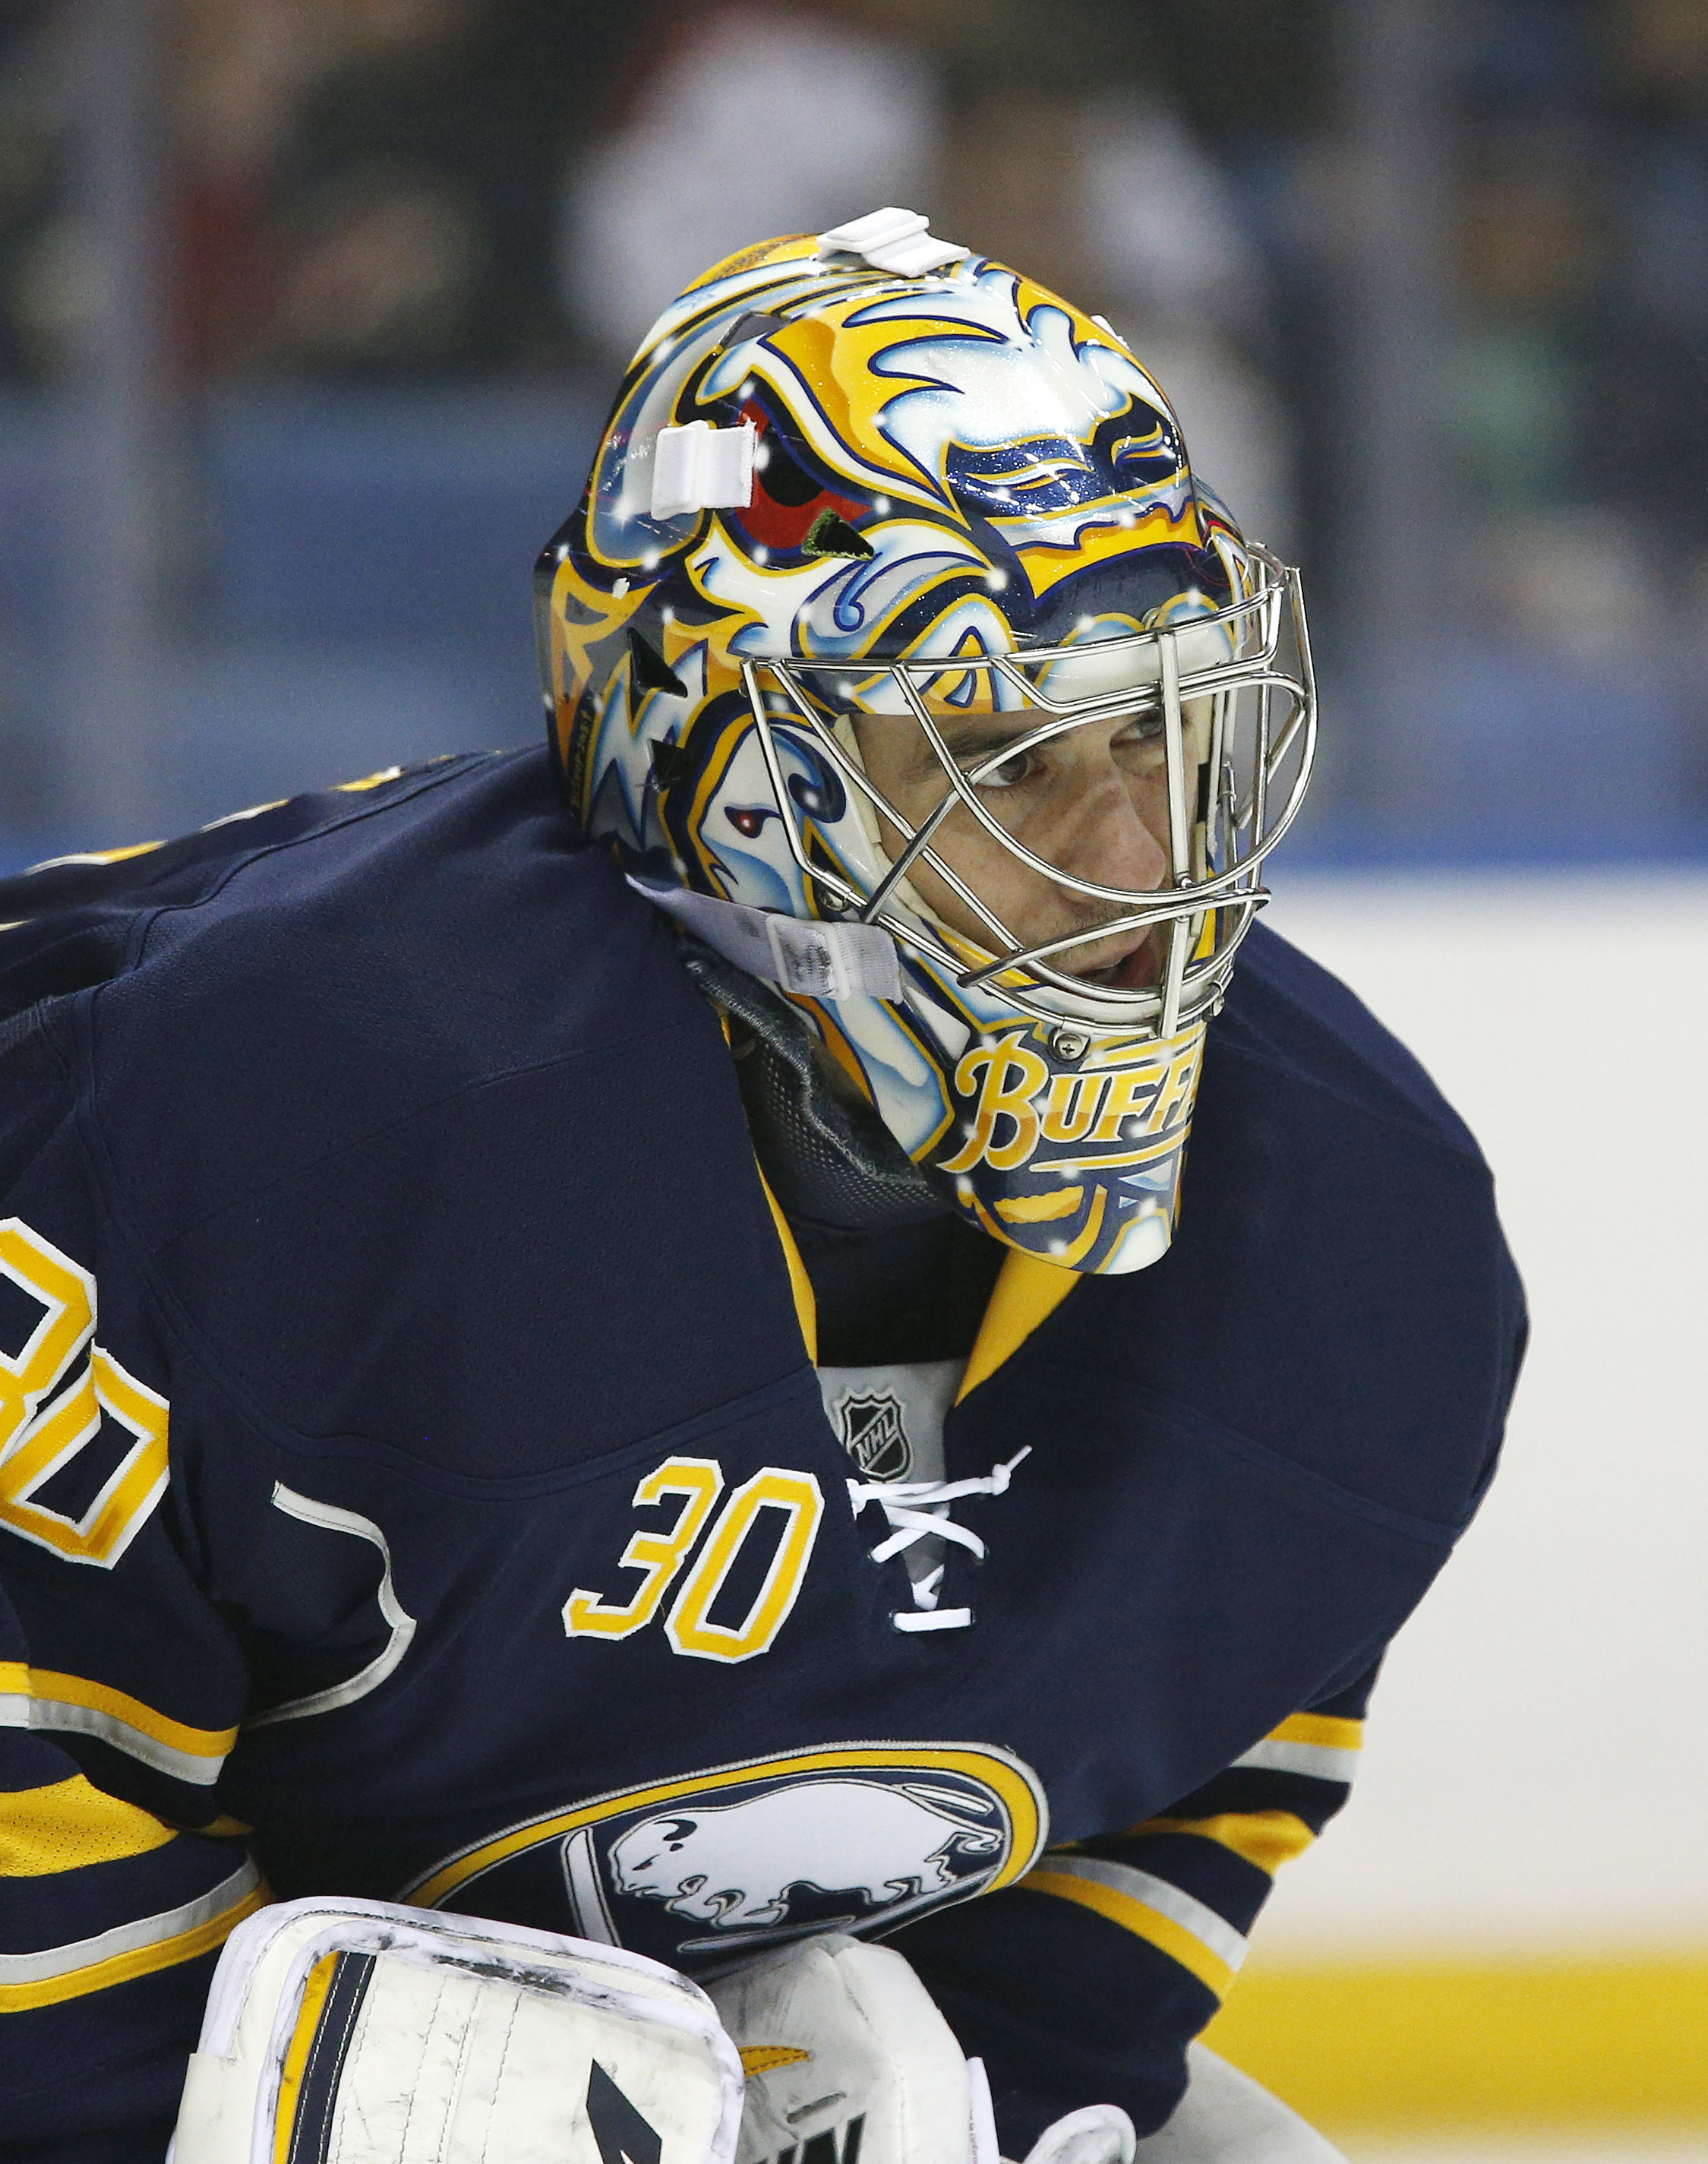 Ryan Miller makes 49 saves, Sabres top Capitals in SO